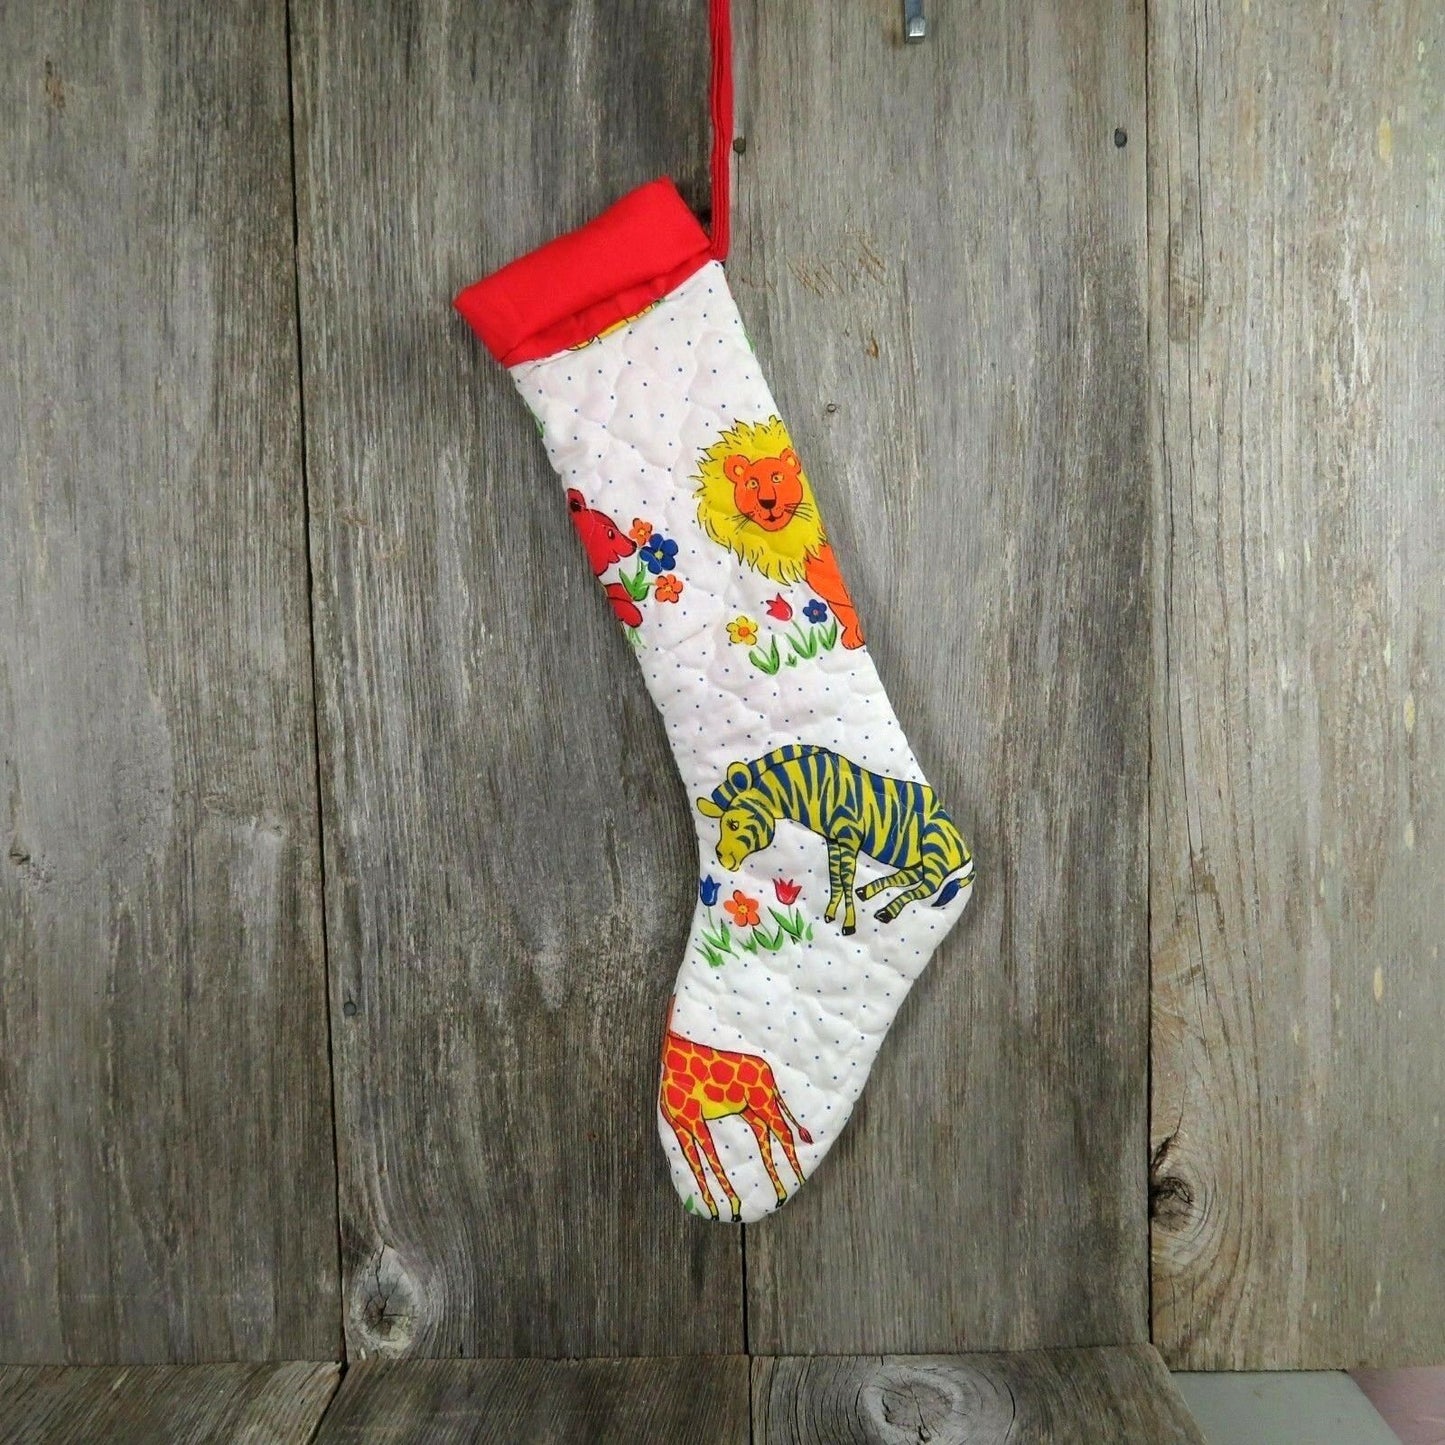 Vintage Christmas Stocking Quilted Jungle Animals Handmade Fabric Lion Tiger - At Grandma's Table